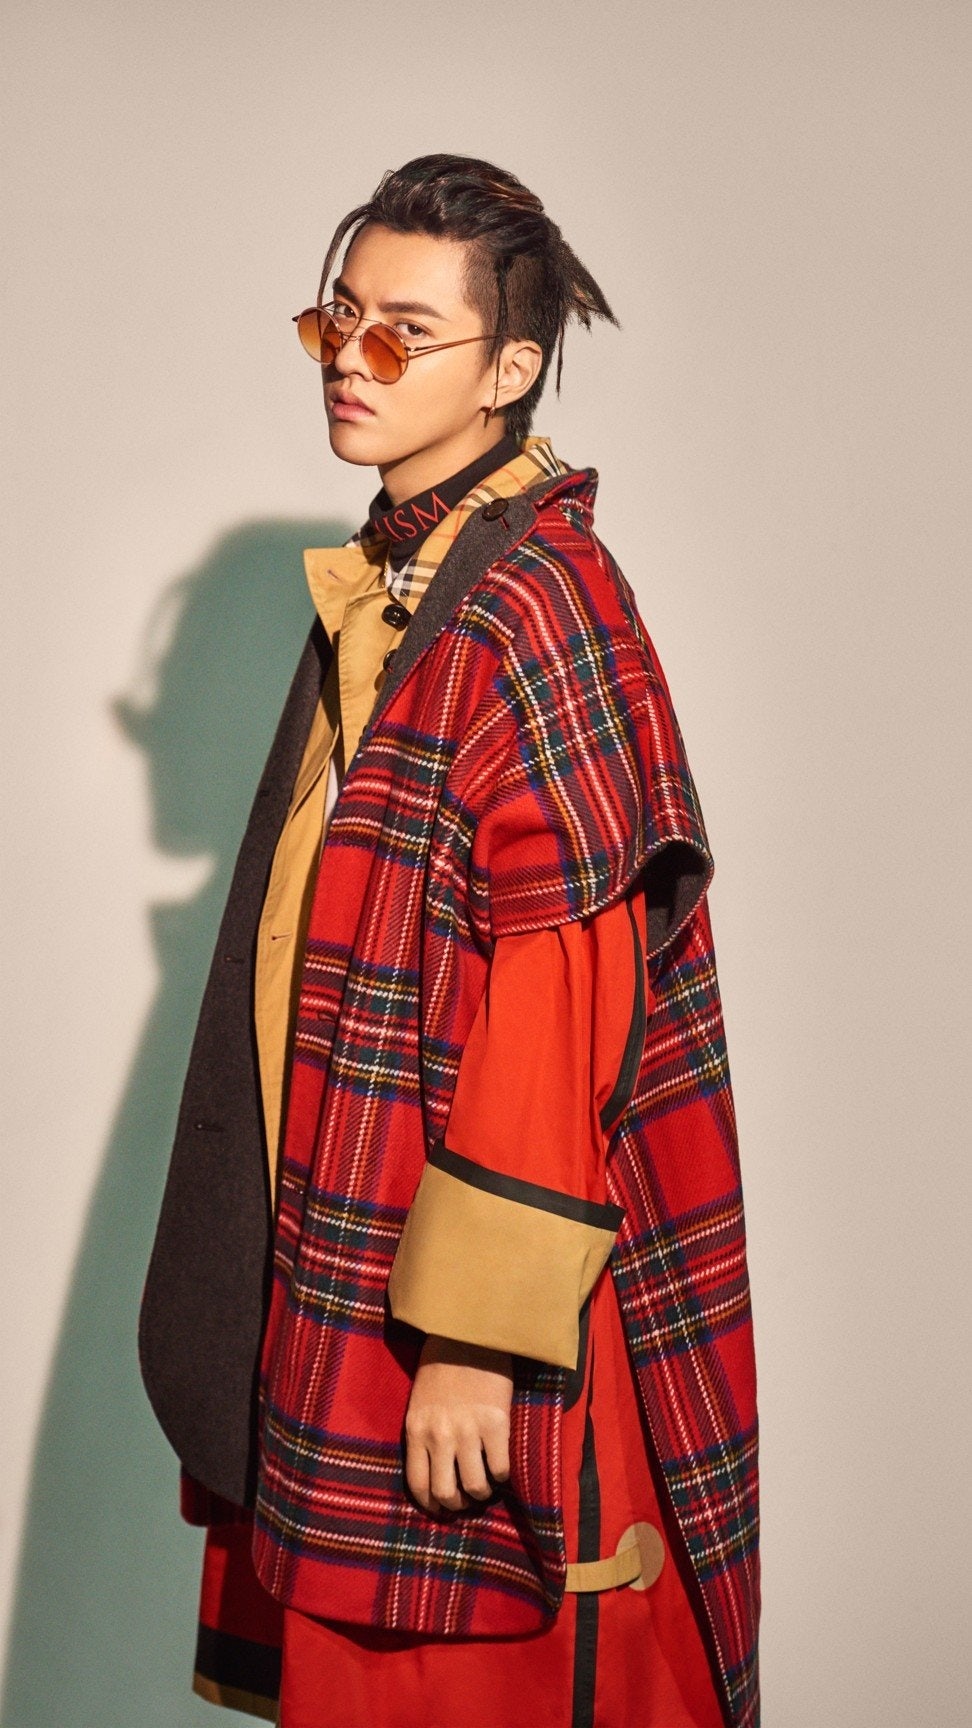 Kris Wu is the ambassador of Burberry. He is the brand’s first non-British global ambassador.